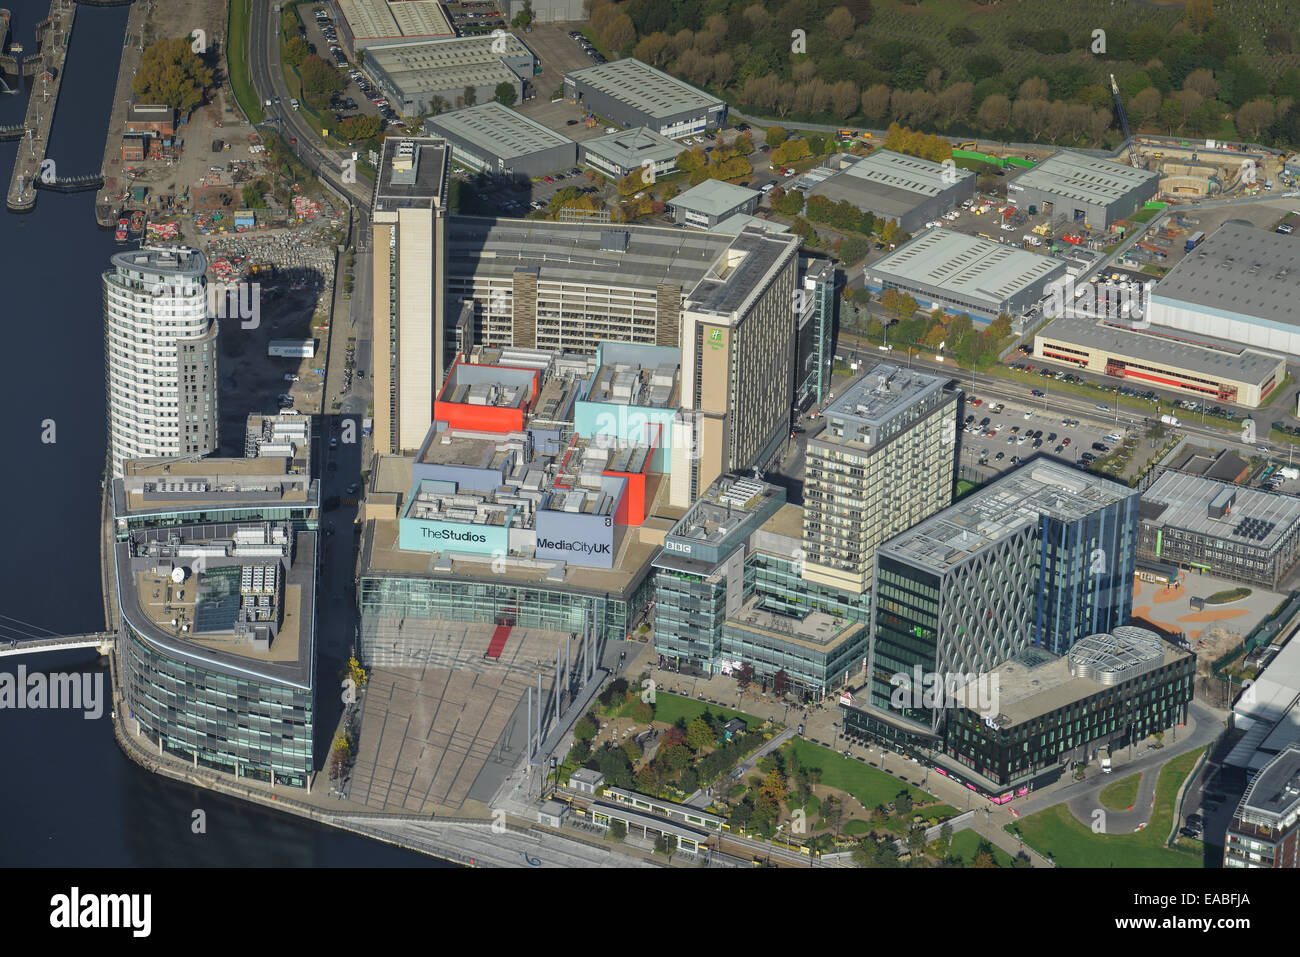 An aerial view of MediaCityUK in Salford, Manchester. Home of the BBC Stock Photo